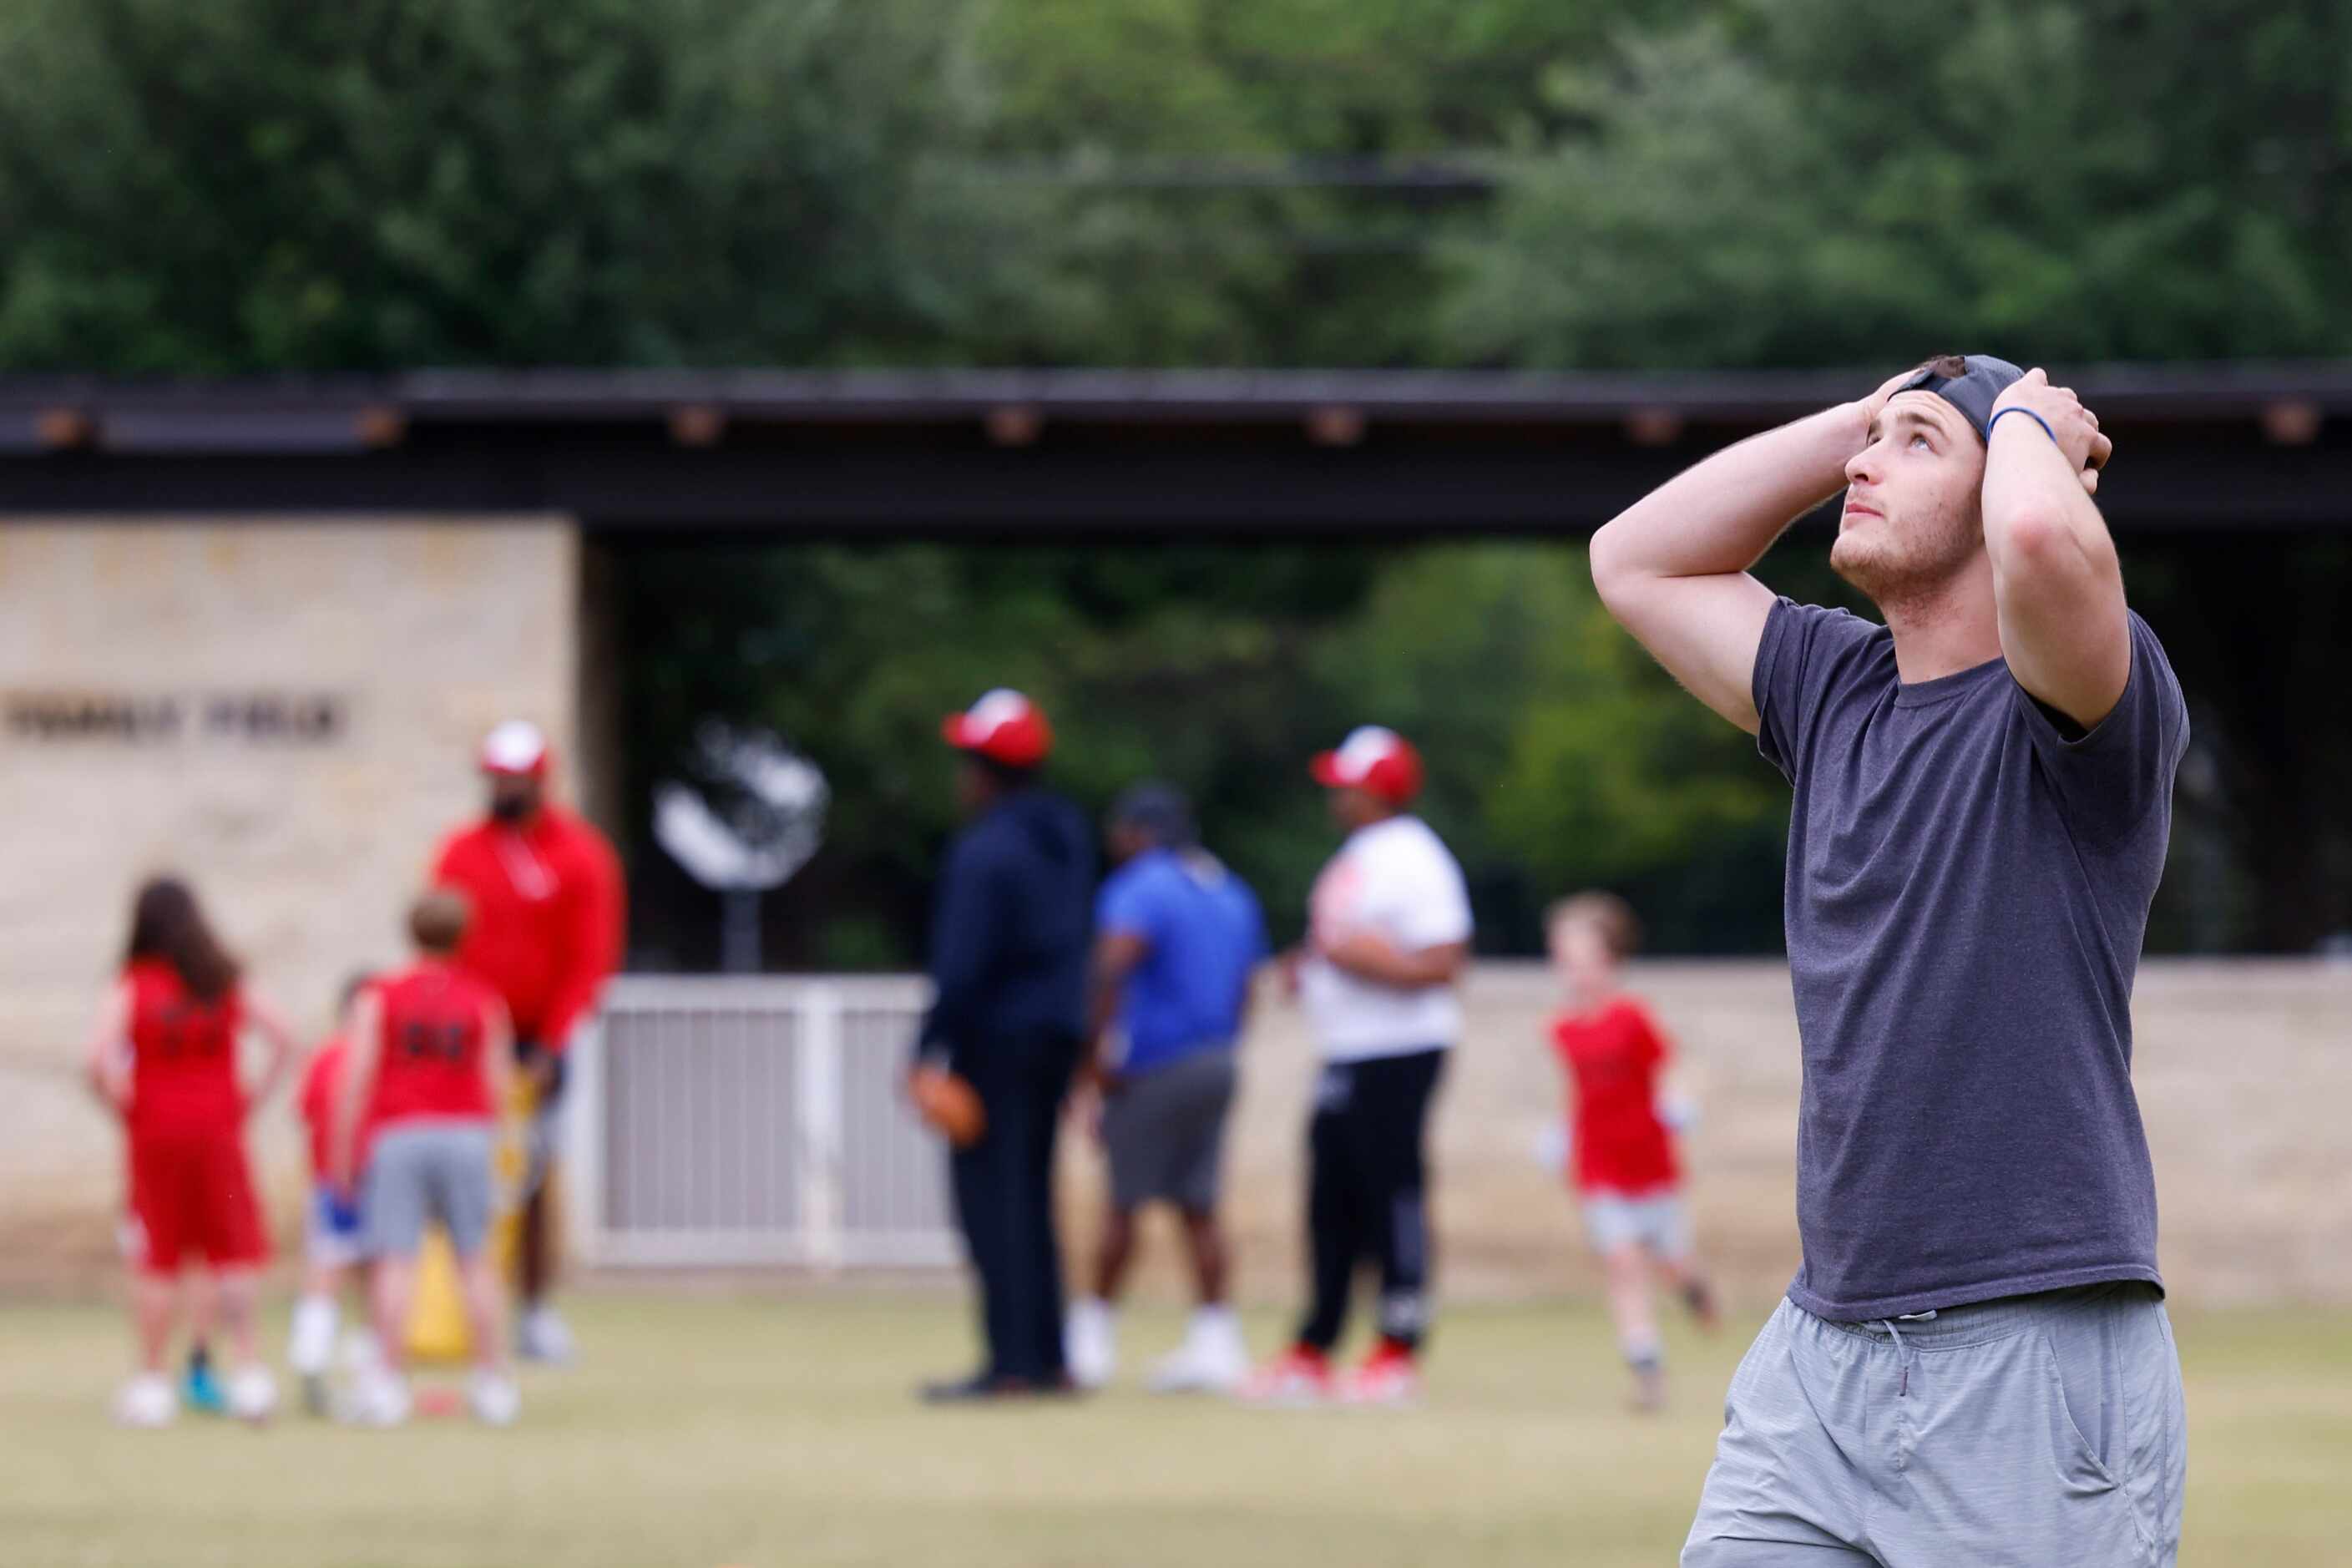 SMU QB Preston Stone reacts to a throw during a special session of football drills and...